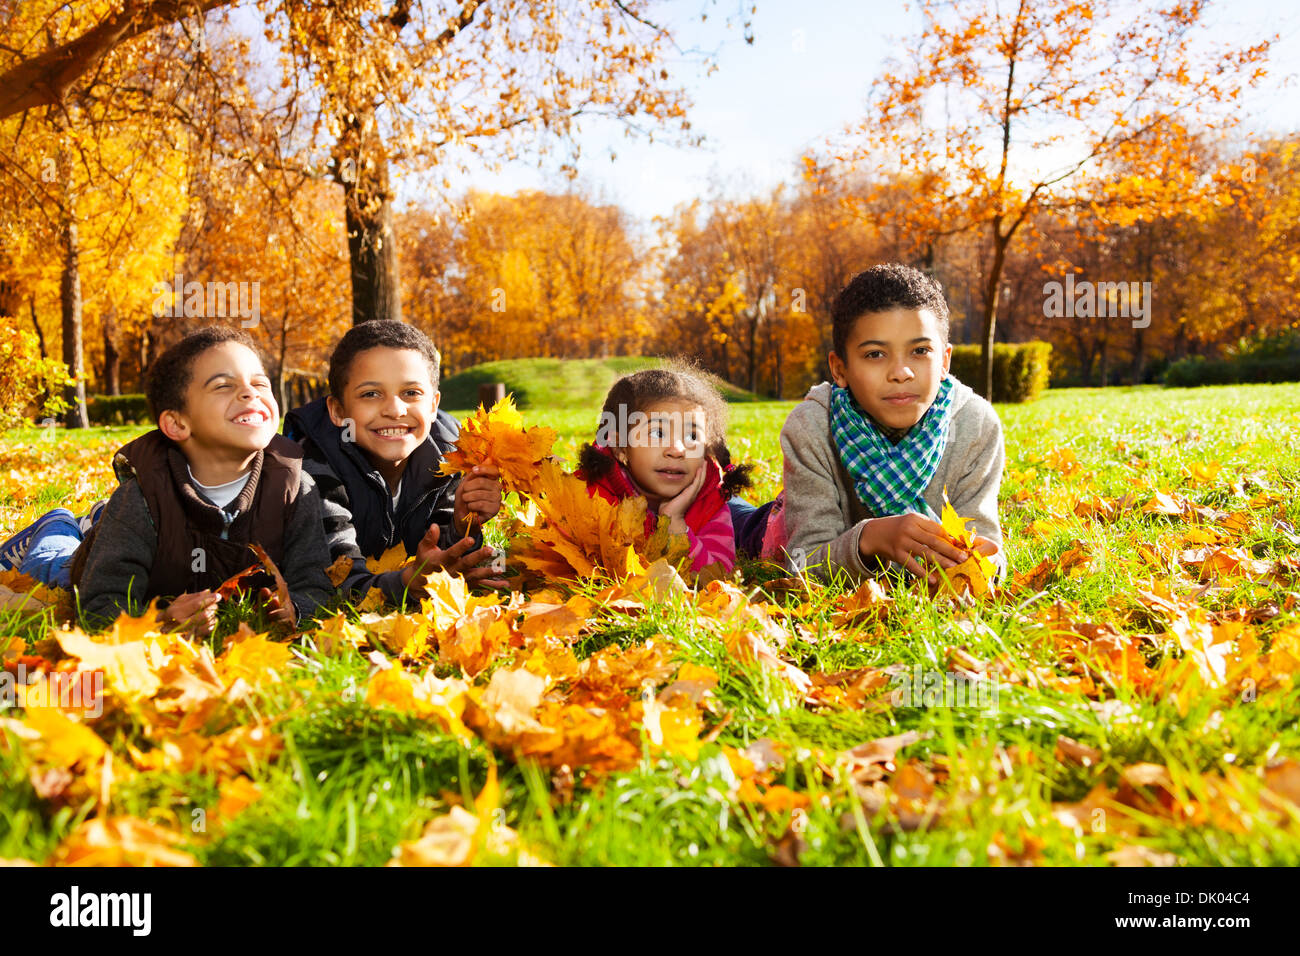 Group of four black boys and girl, happy brothers and sister 3-10 years old laying in grass together in the park in autumn clothes holding maple leaves bouquets Stock Photo